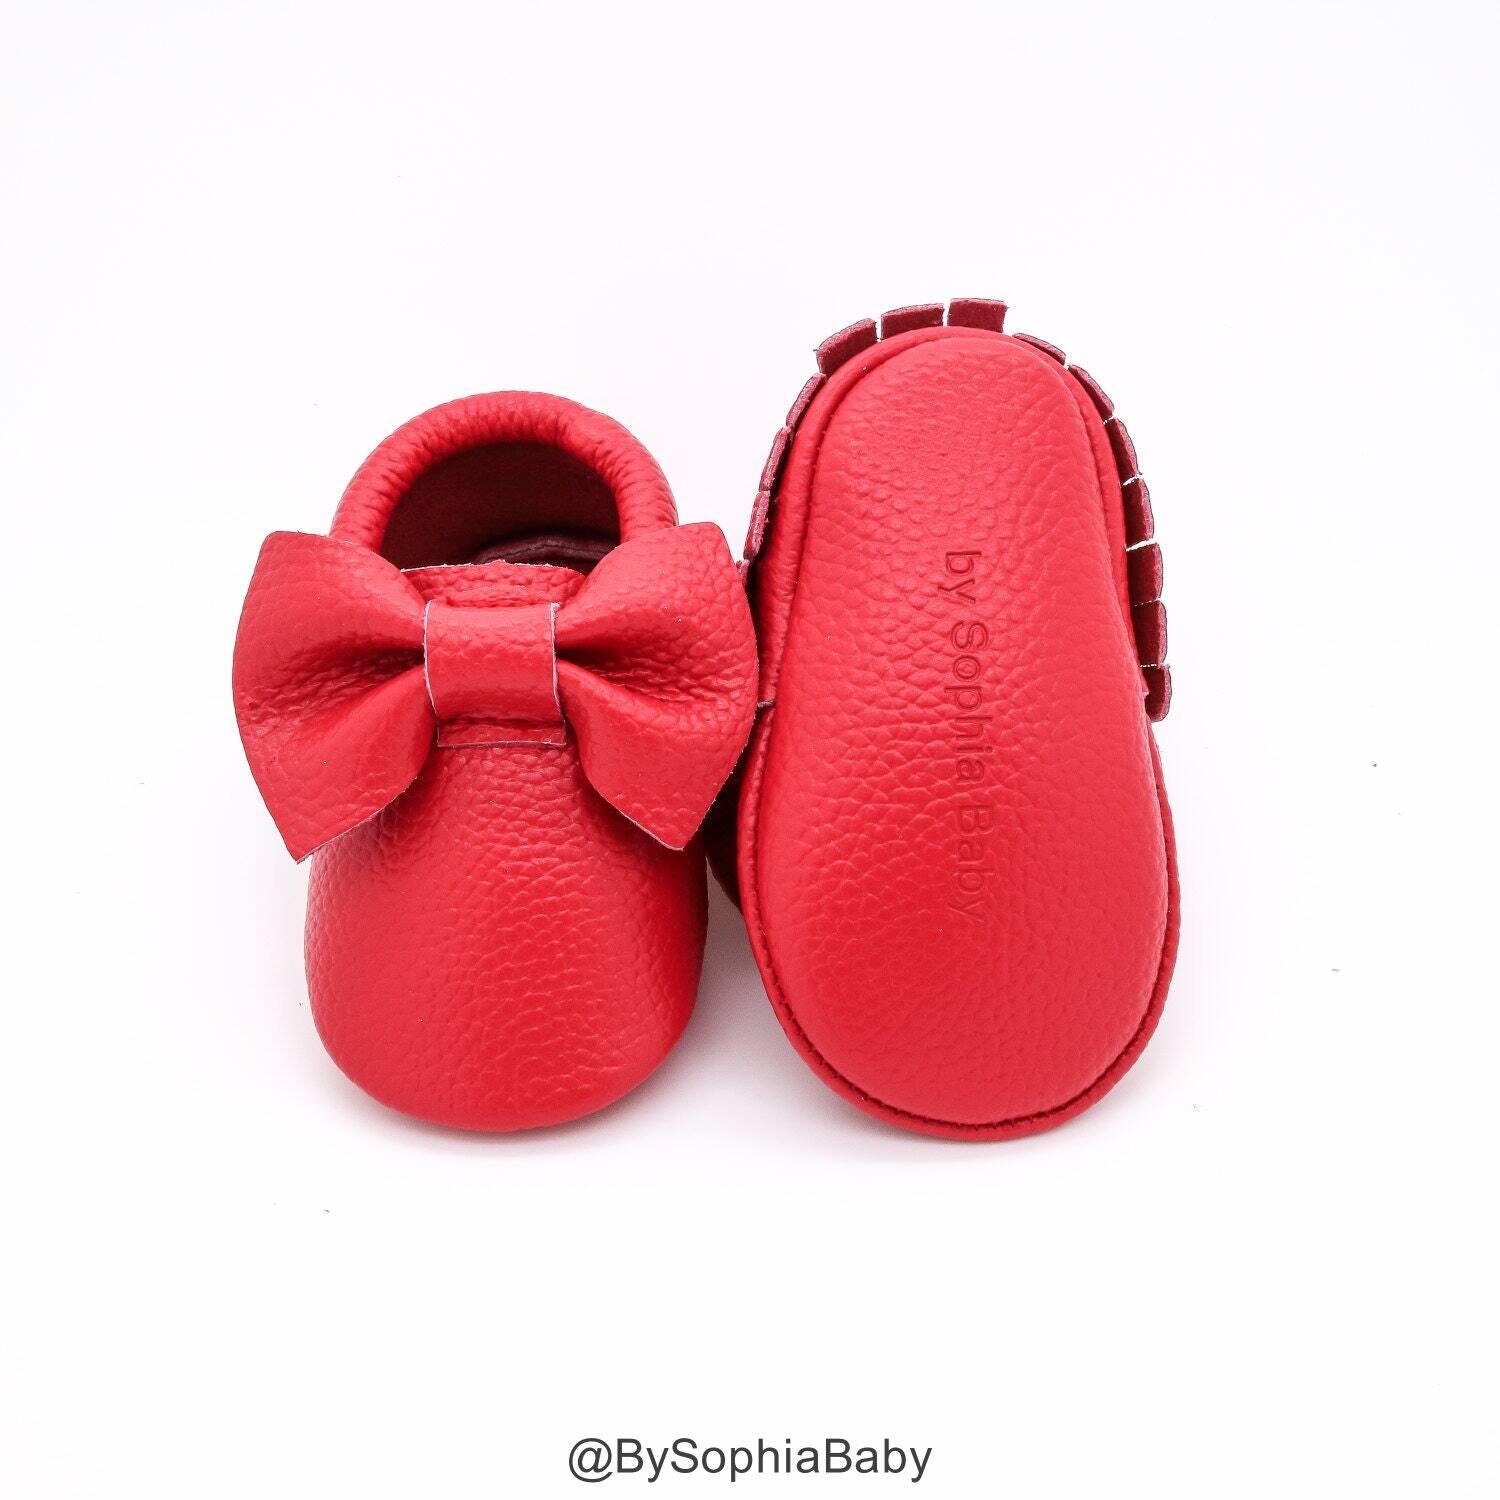 Baby Moccasins Baby Red Bow Moccasins Baby Leather Shoes Genuine Leather Moccs Toddler Moccasins Baby Moccs Baby Shower Gift